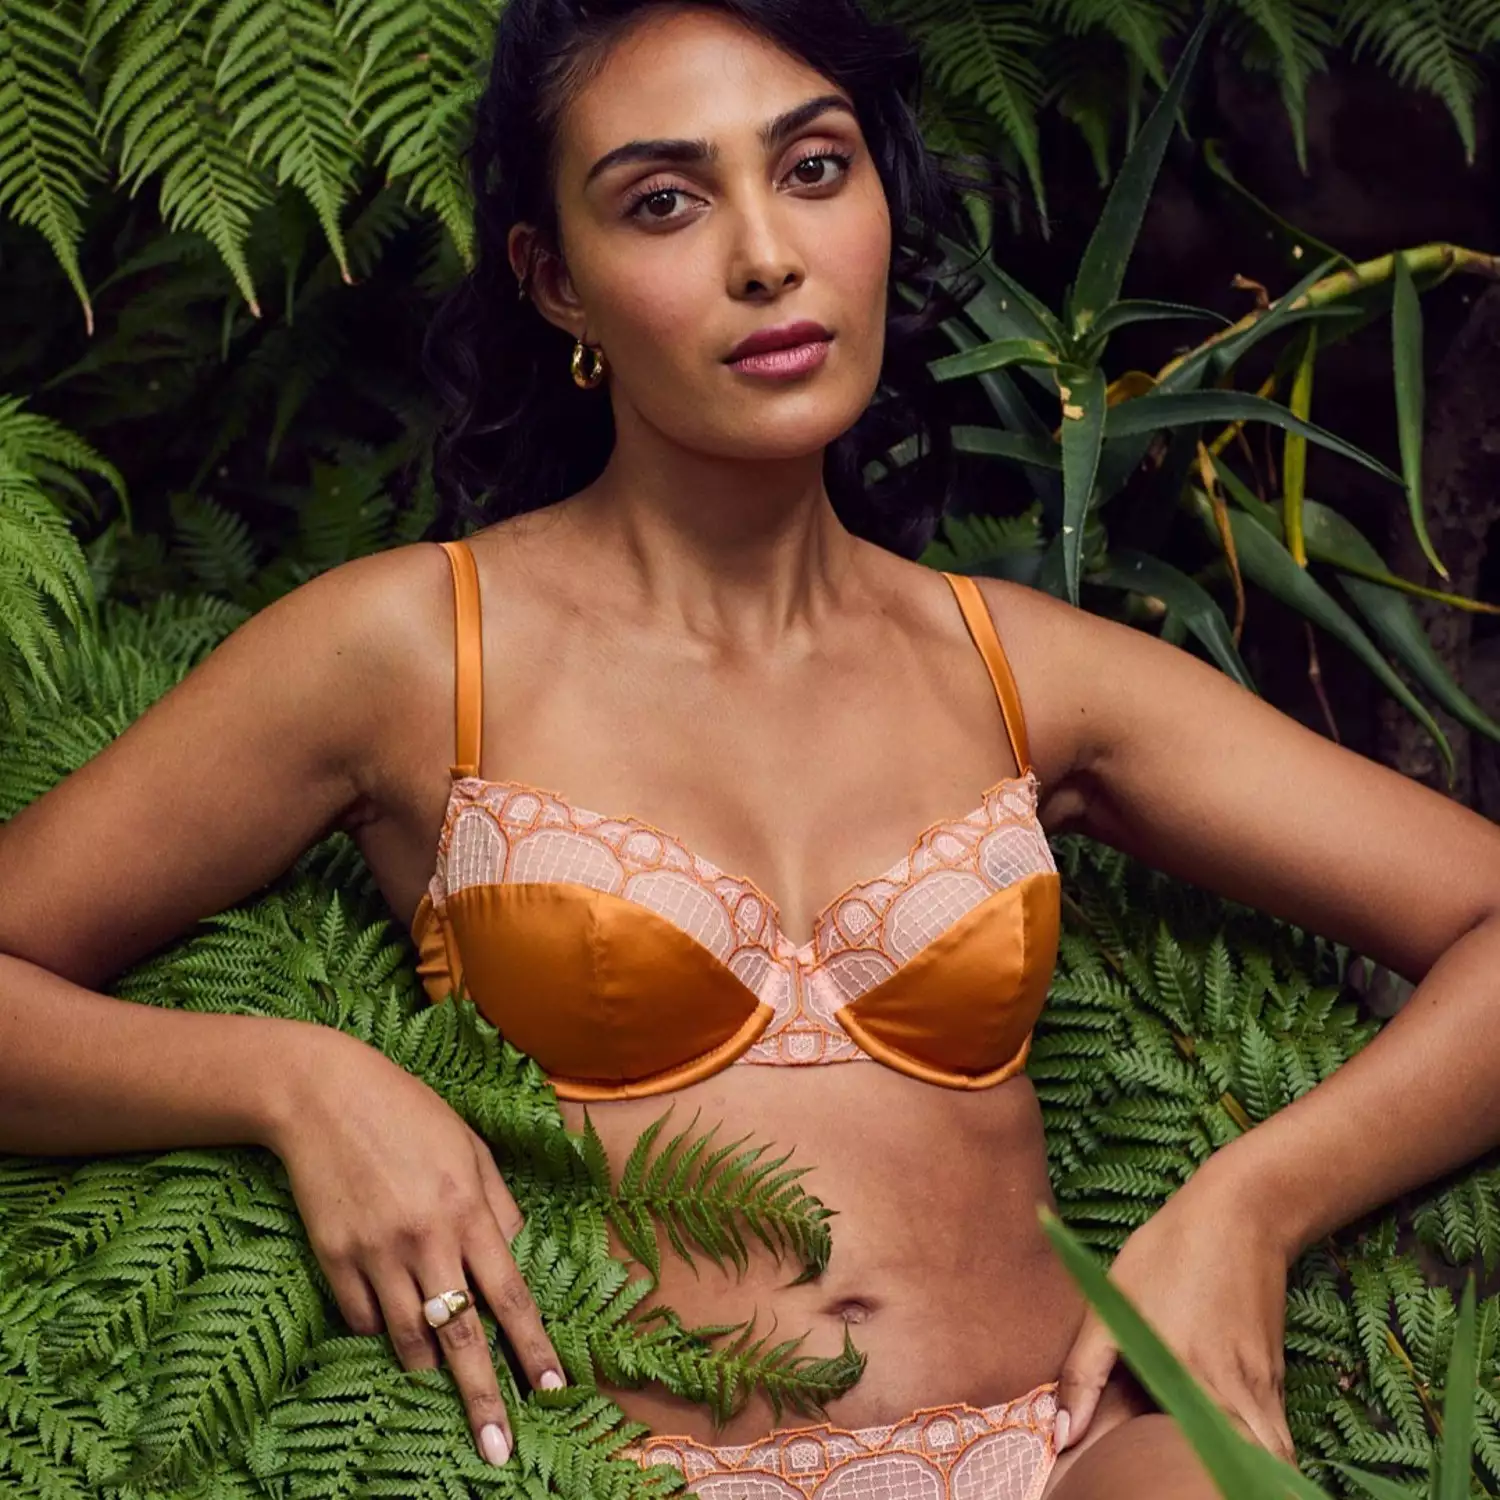 Model wearing an orange silk bra and panties set in a leafy environment